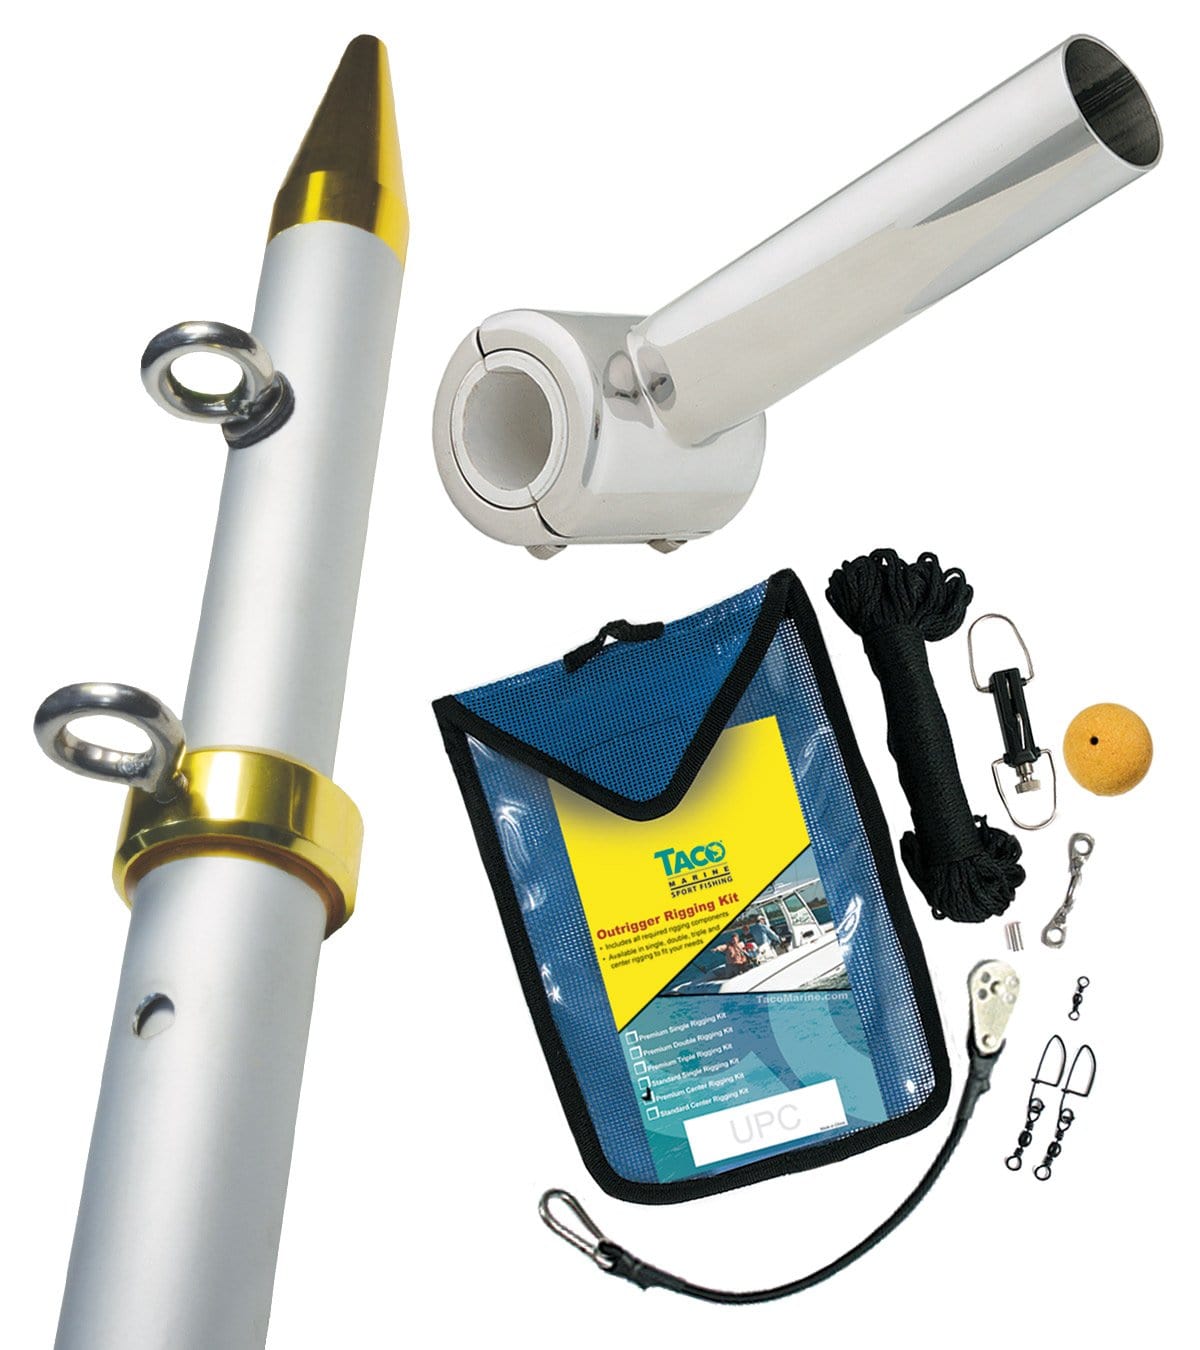 Taco F16-0311VEL8SB Clamp-On Center Rigger Kit with 8 ft. Silver-Gold Pole & Rigging Kit